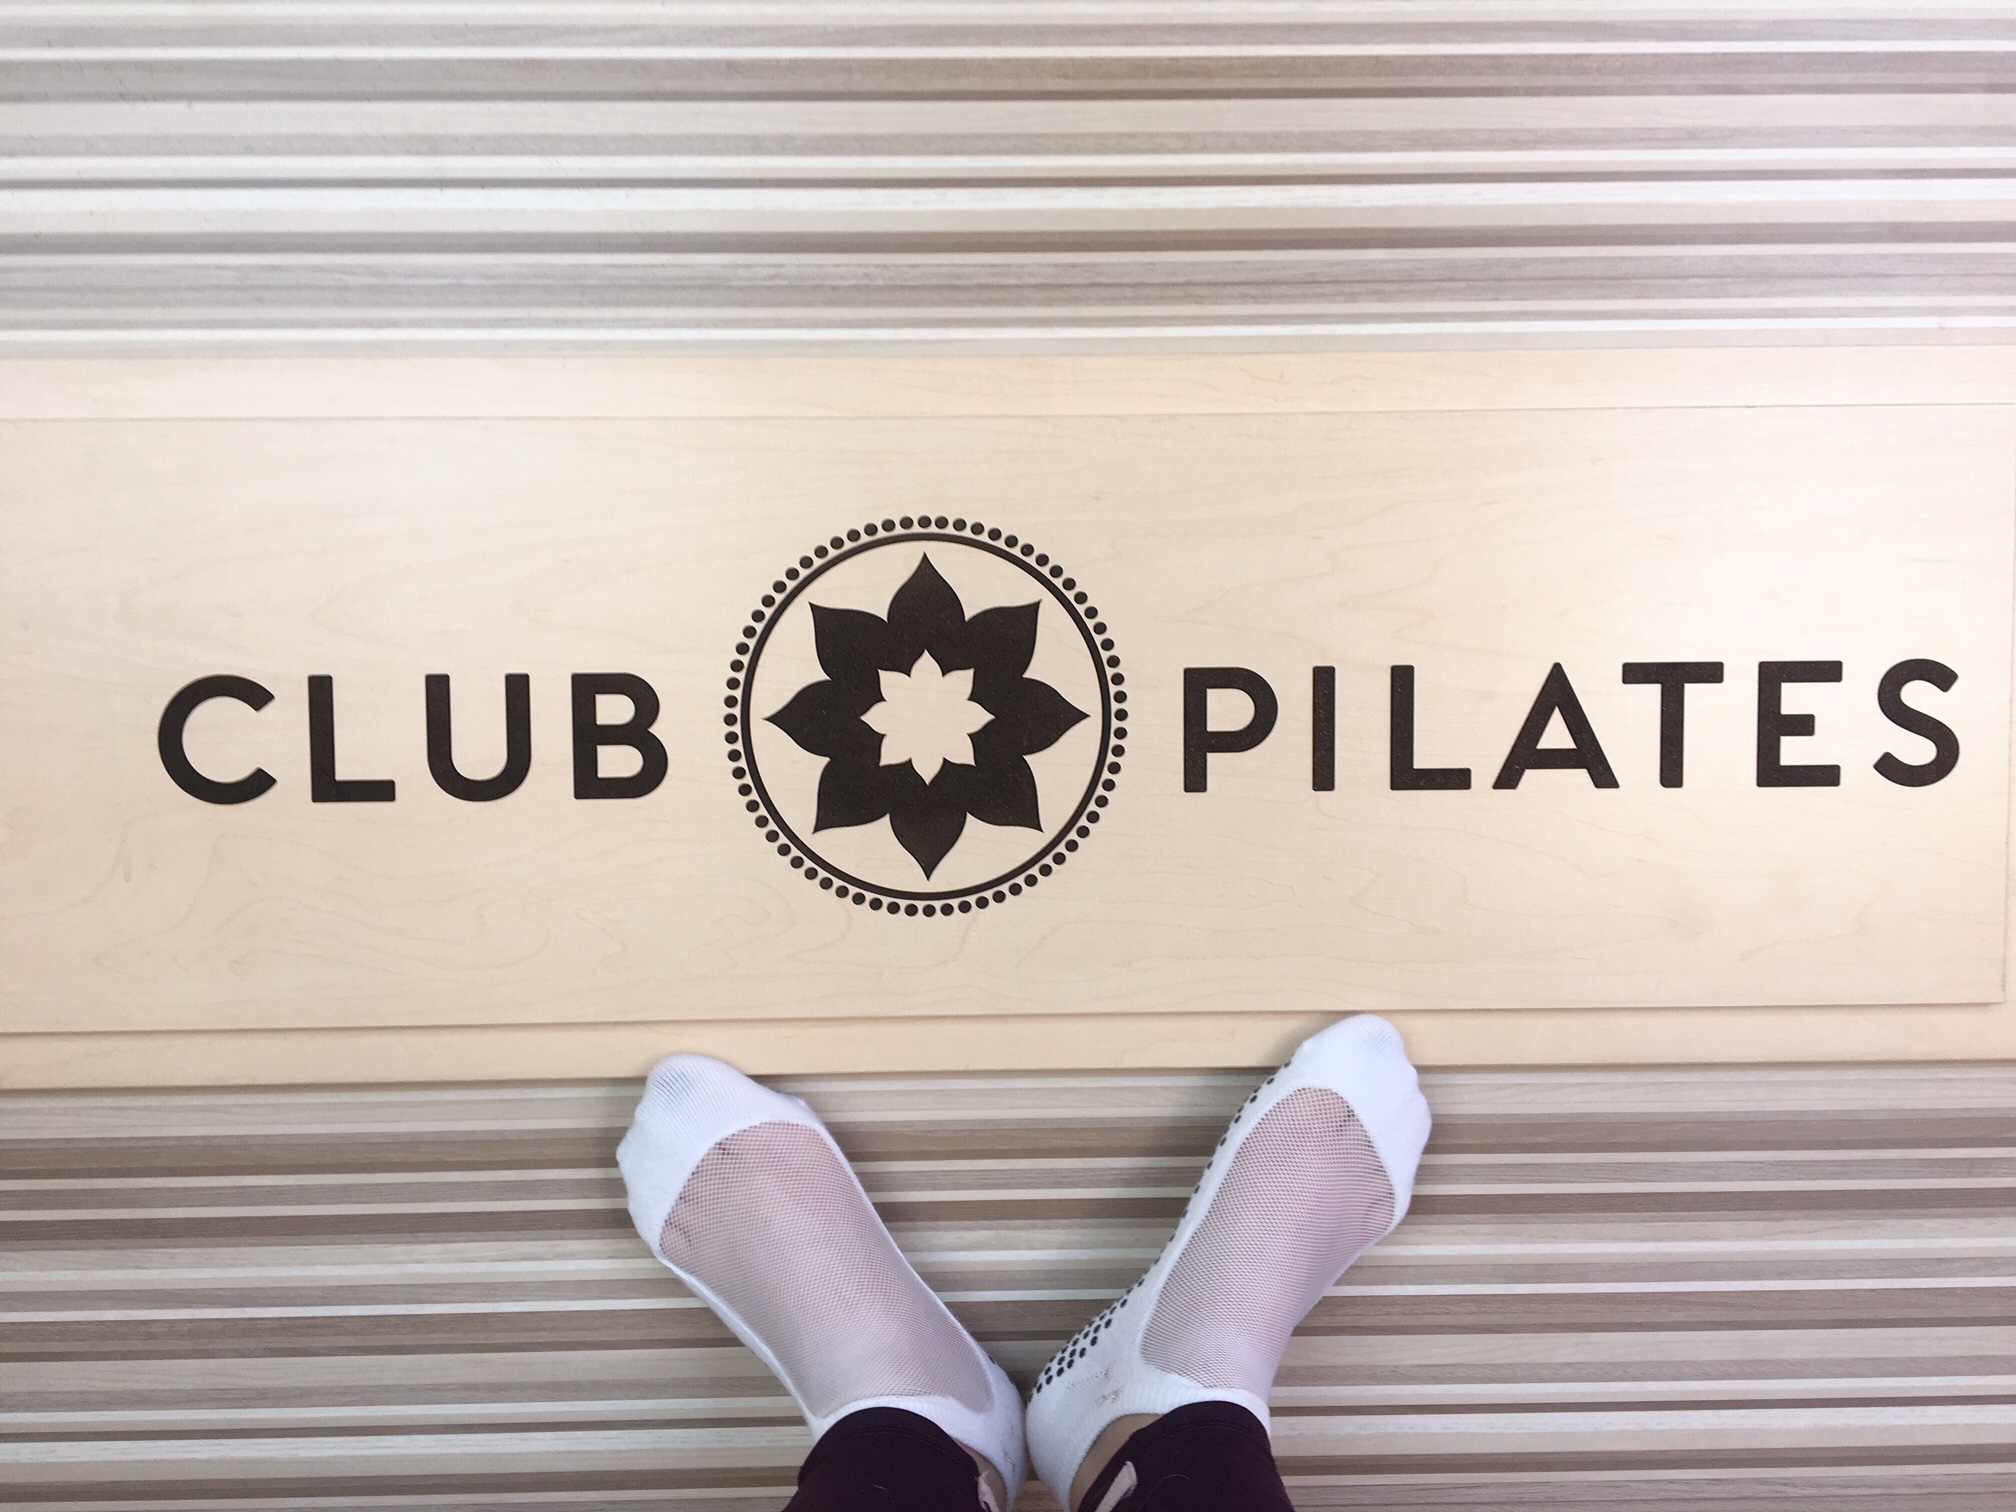 The First Timer's Guide to Pilates & Spin Featuring SimplyWorkout